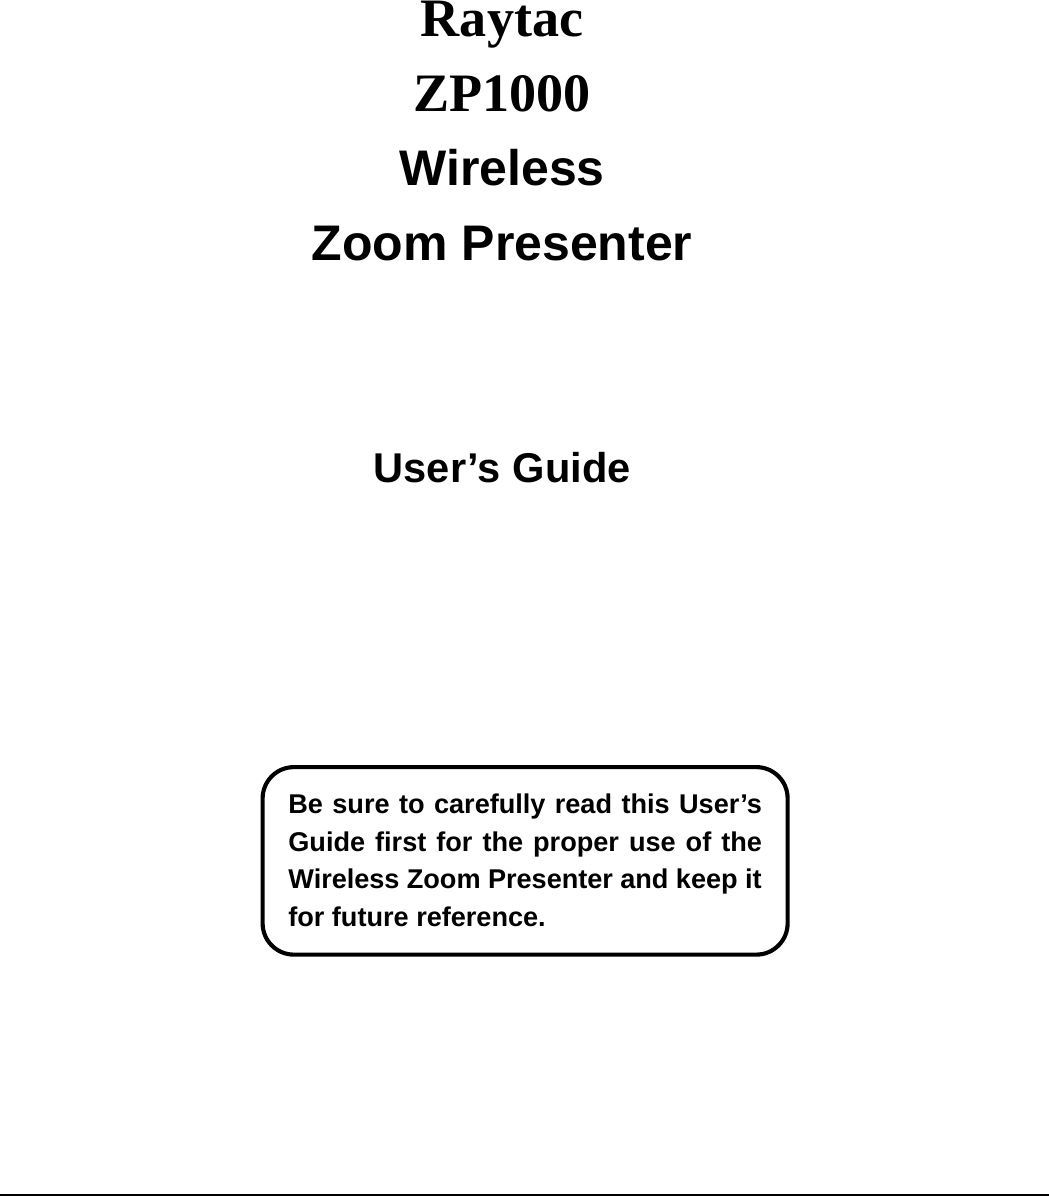    Raytac ZP1000 Wireless Zoom Presenter    User’s Guide                                                          Be sure to carefully read this User’sGuide first for the proper use of theWireless Zoom Presenter and keep itfor future reference. 